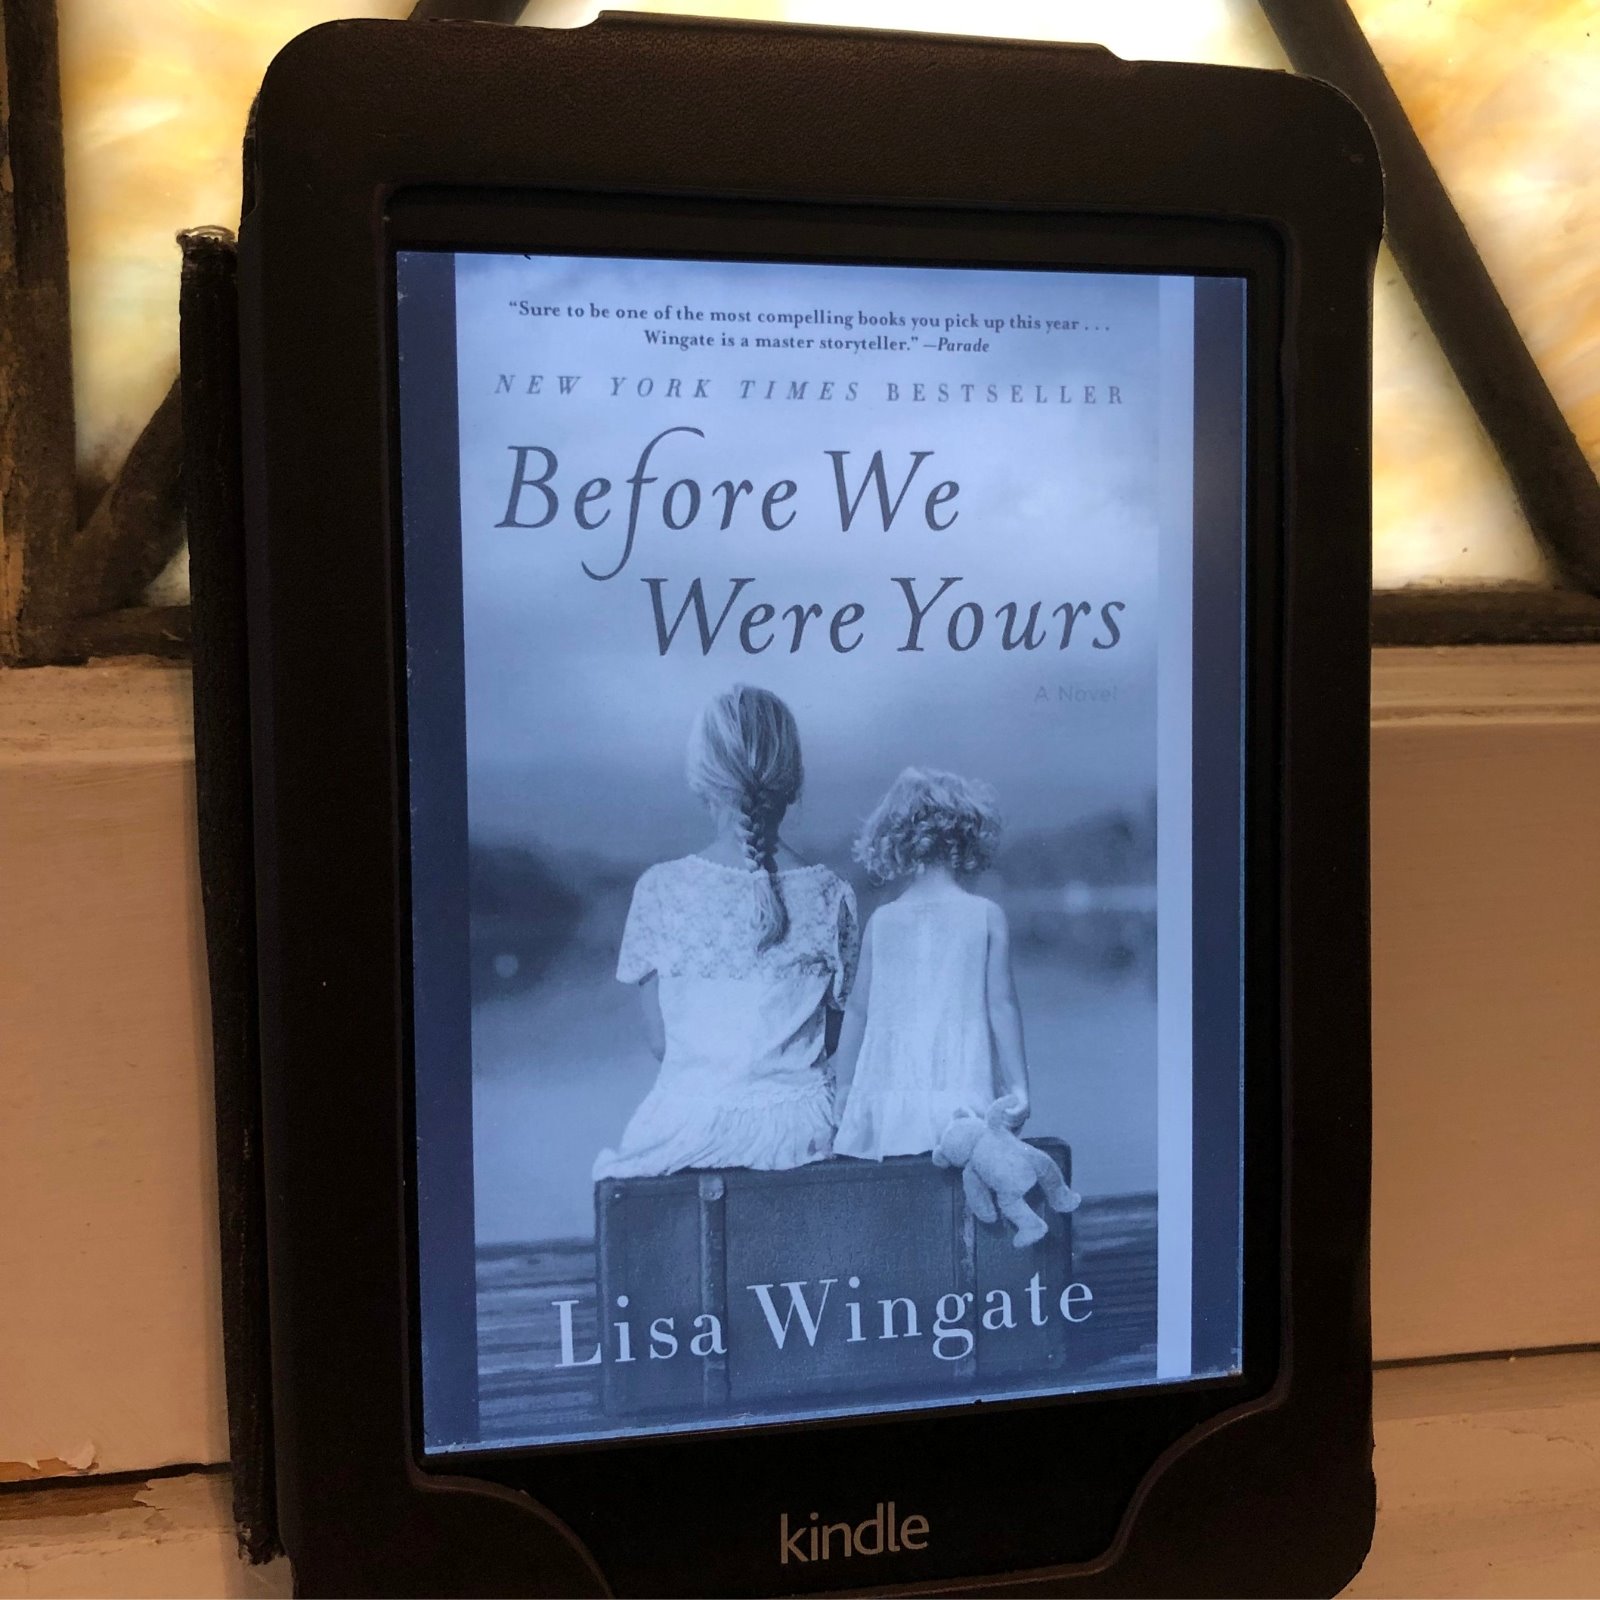 13-best-before-we-were-yours-by-lisa-wingate-kindle-for-2023